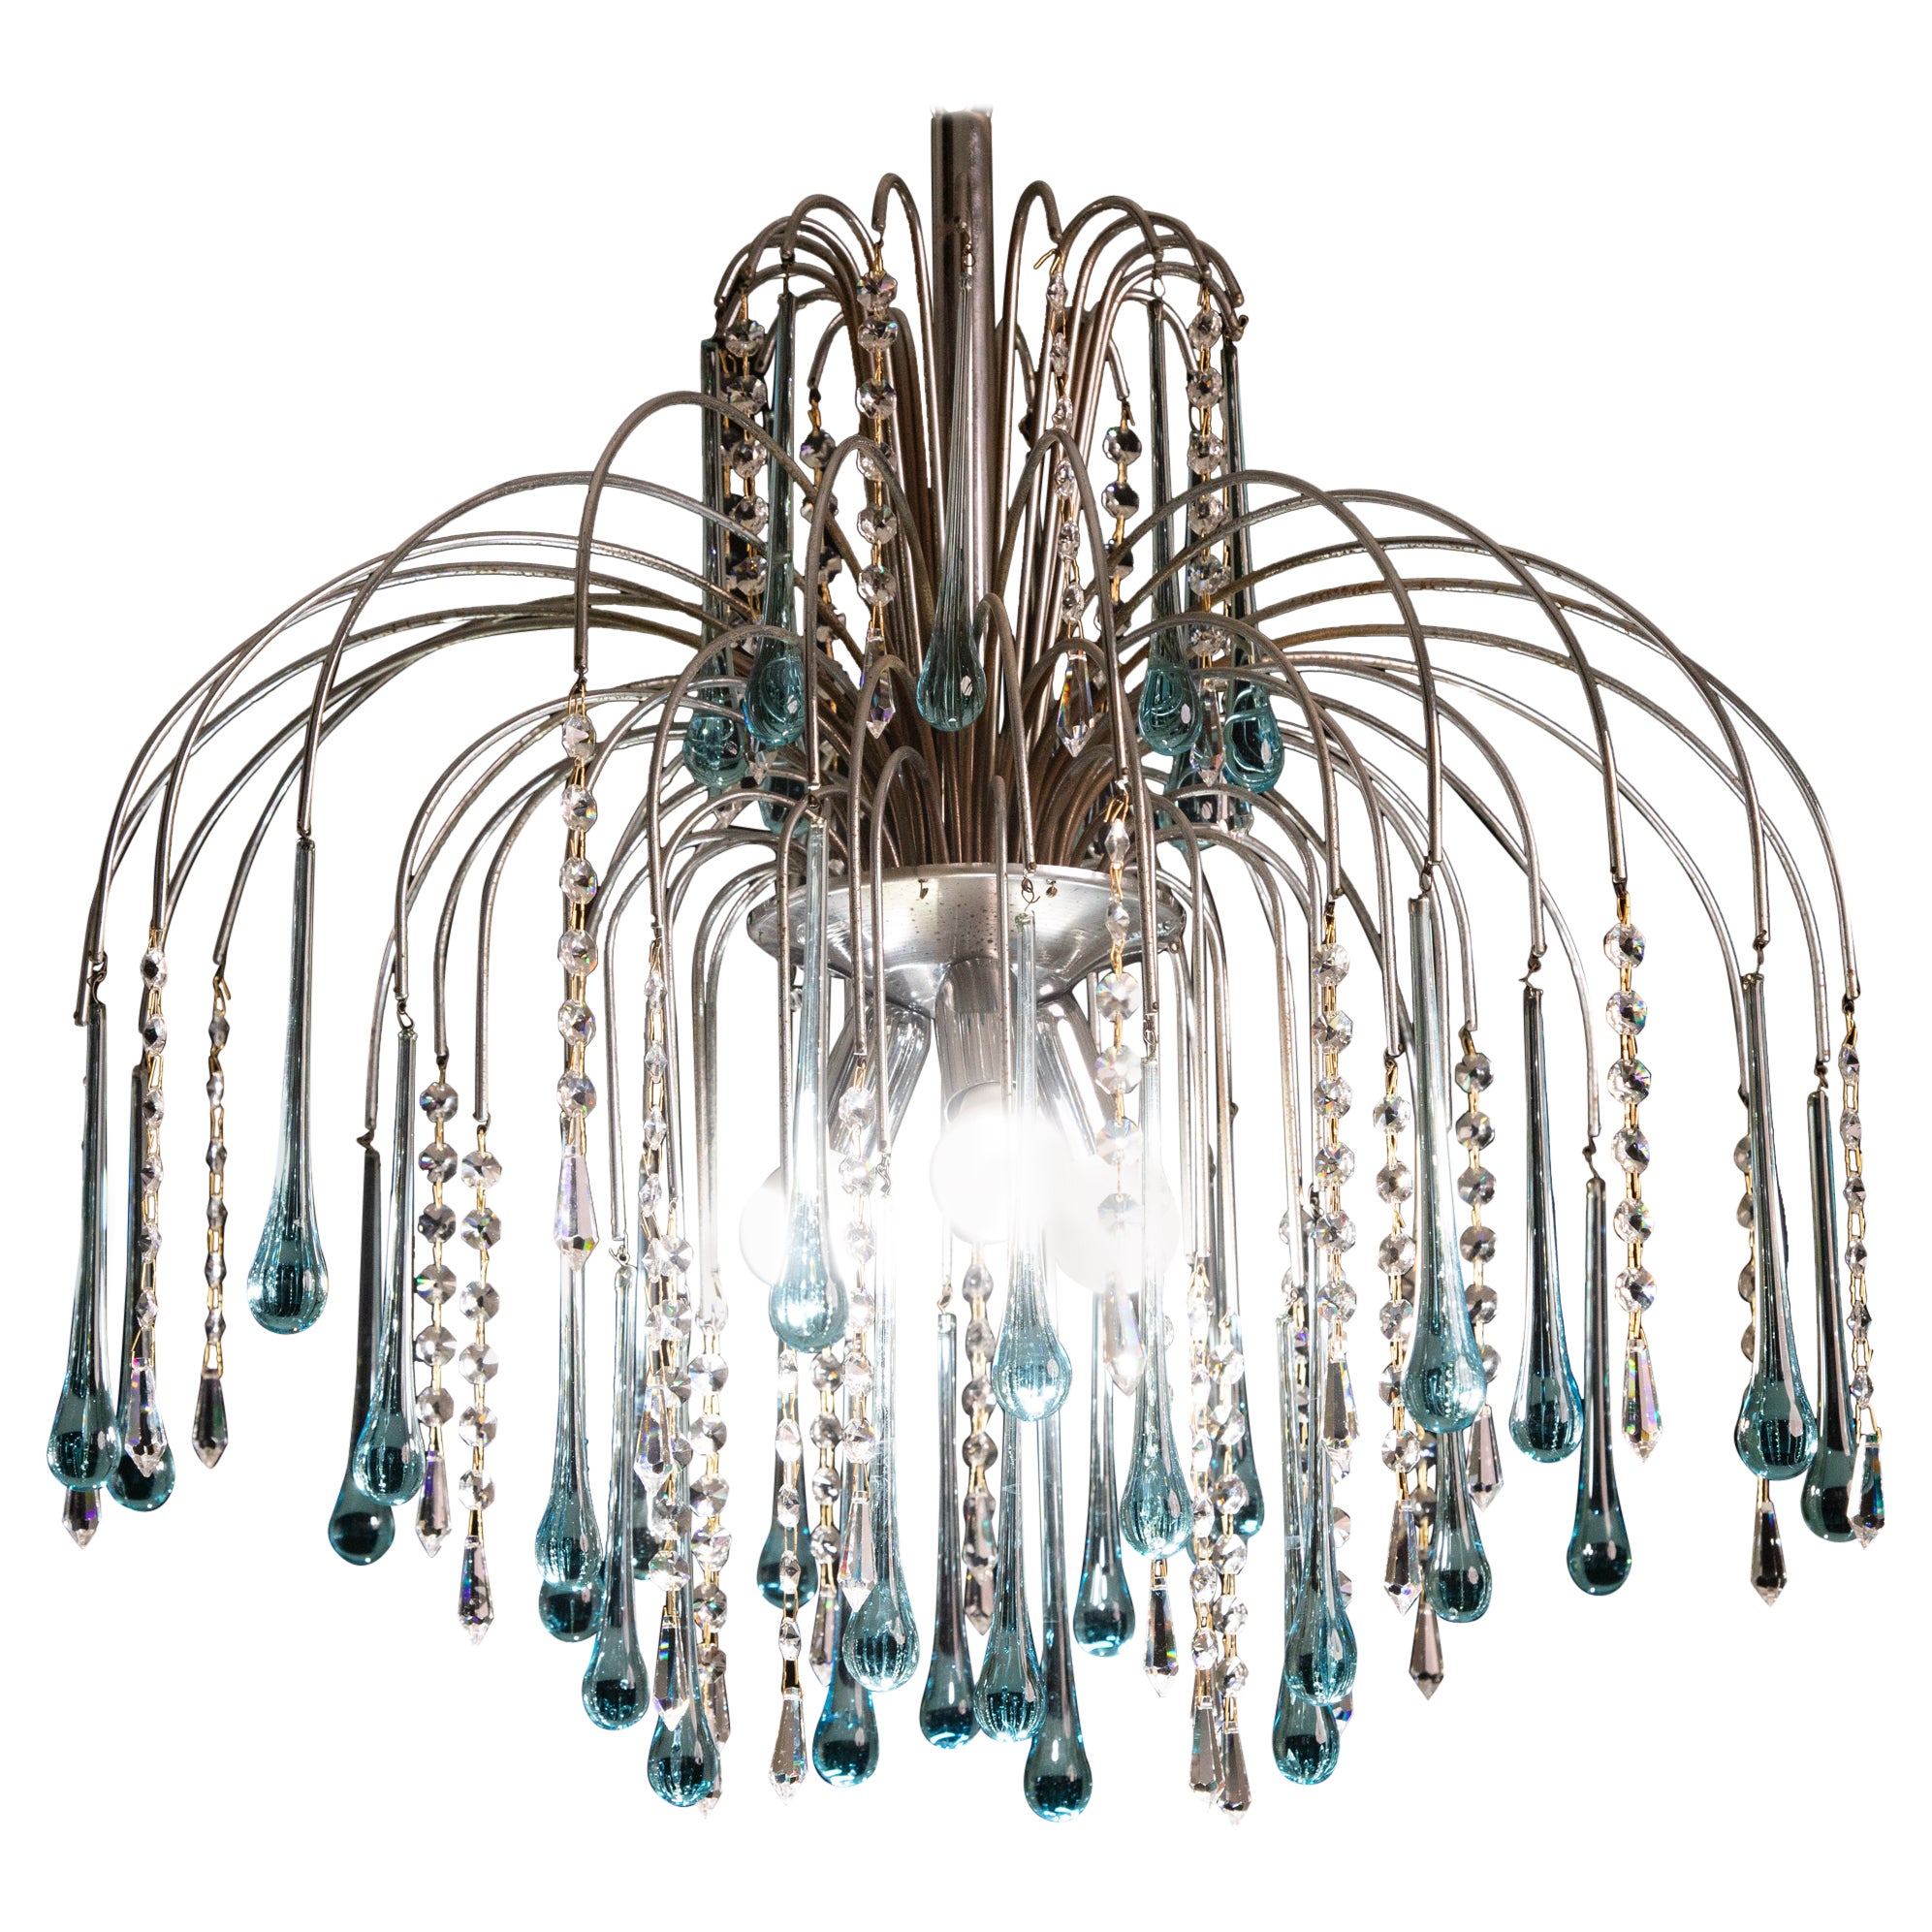 Gorgeous Murano chandelier in the style of Venini's La Cascata.
The frame is crown-shaped in nickel-plated silver, some signs of time.
The chandelier consists of rounds composed of beautiful clear crystal drops alternating with blue Murano